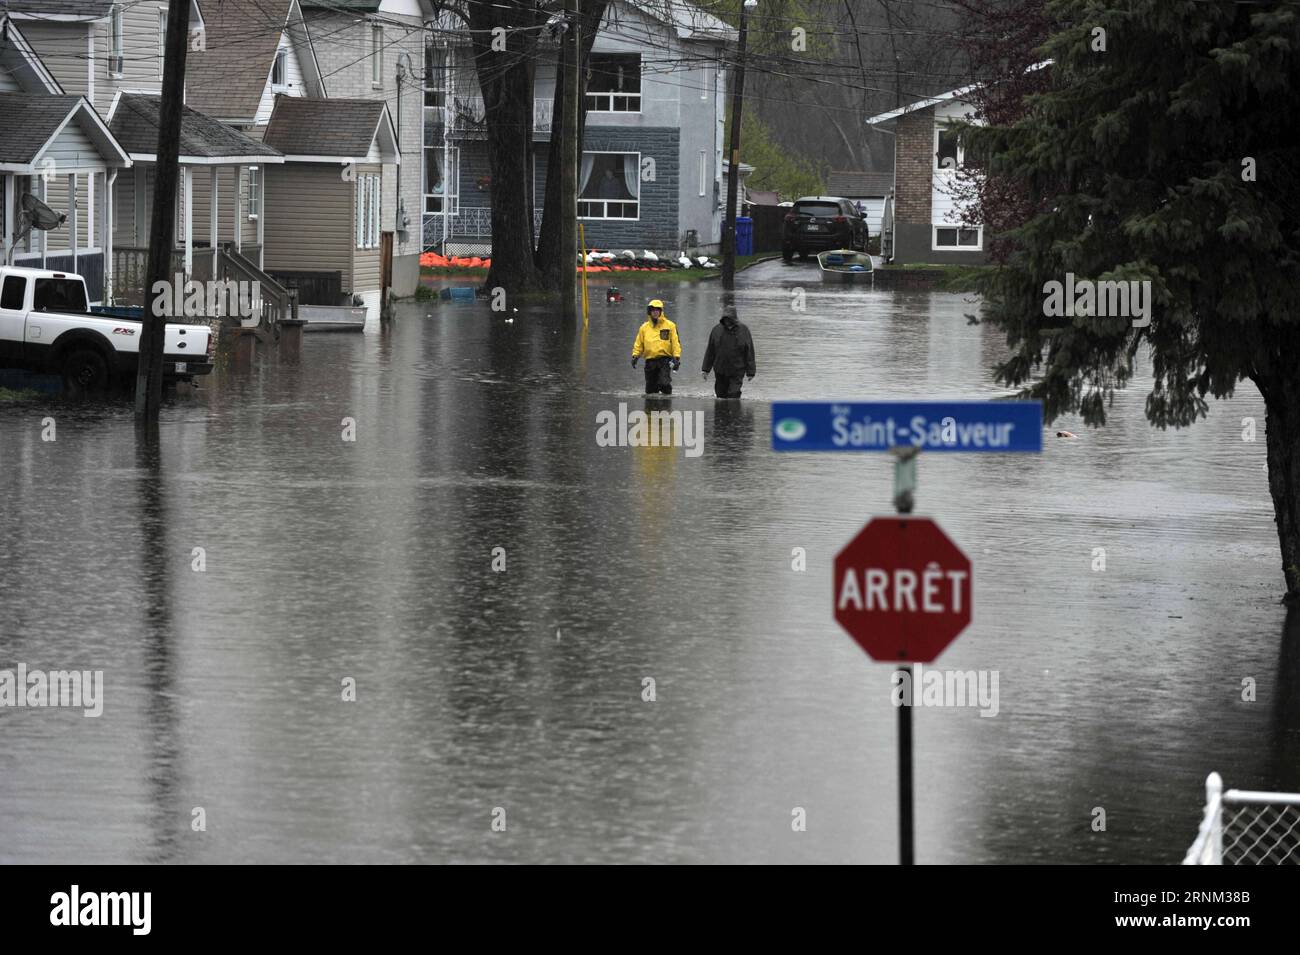 (170506) -- GATINEAU, May 6, 2017 -- People walk in the street of flooded Gatineau, Quebec province of Canada, May 5, 2017. Several areas across Quebec is flooded as heavy rain has continued for days in eastern Canada. ) (zxj) CANADA-GATINEAU-FLOOD KADRIxMohamed PUBLICATIONxNOTxINxCHN   Gatineau May 6 2017 Celebrities Walk in The Street of flooded Gatineau Quebec Province of Canada May 5 2017 several Areas across Quebec IS flooded As Heavy Rain has Continued for Days in Eastern Canada  Canada Gatineau Flood KADRIxMOHAMED PUBLICATIONxNOTxINxCHN Stock Photo